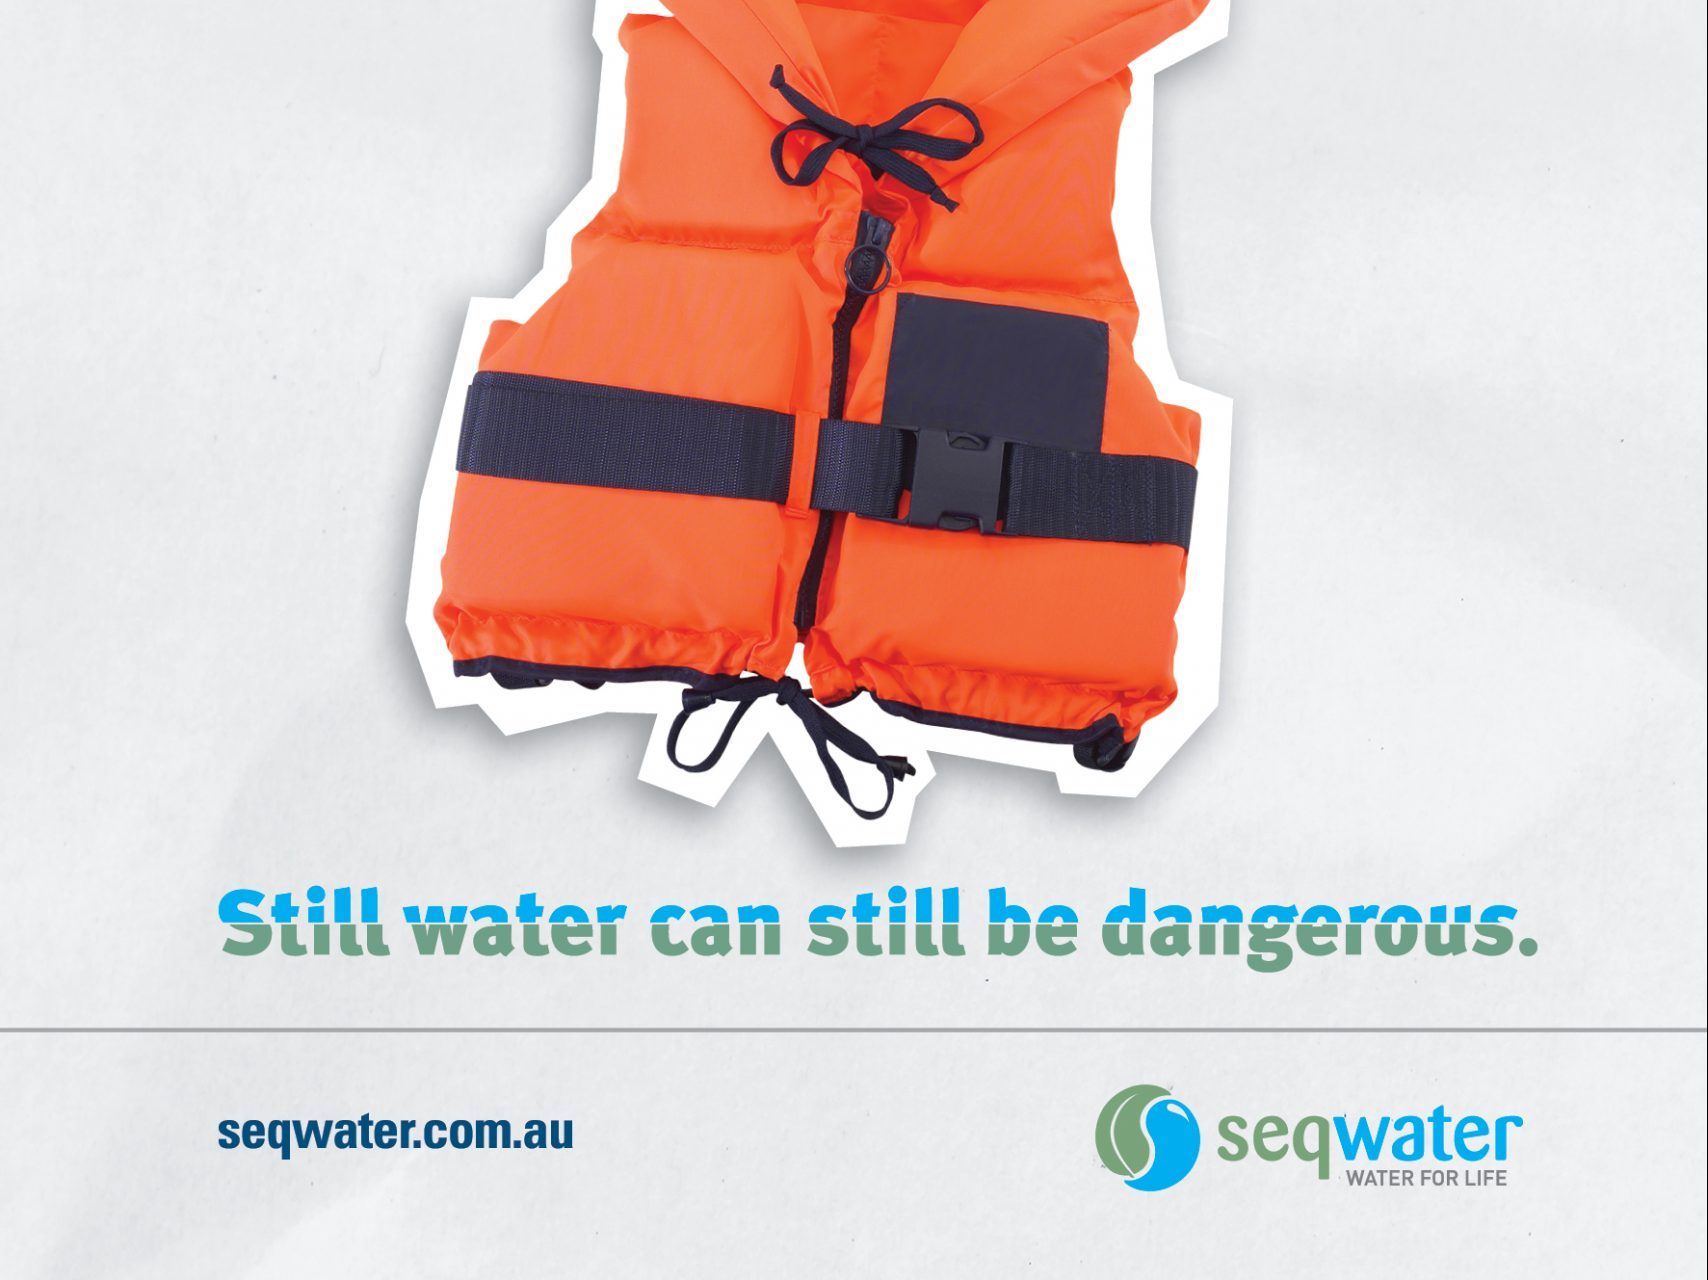 GrowthOps launches Seqwater safety campaign, 'Still water can still be dangerous', for third year running - mUmBRELLA*